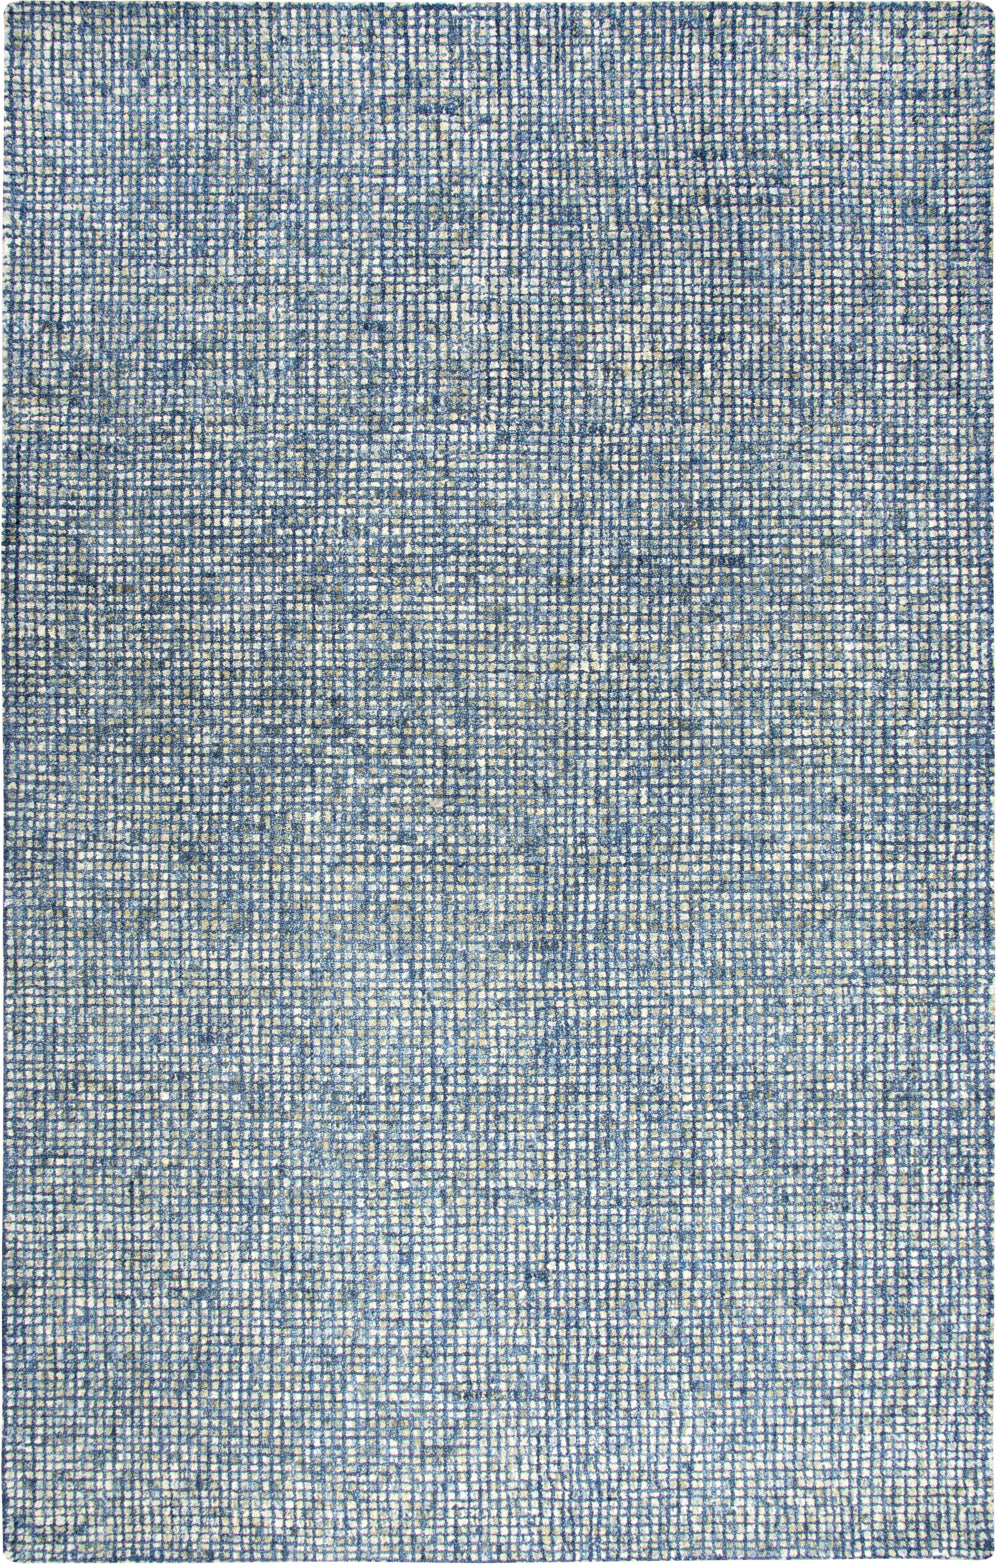 Rizzy Talbot TAL101 Blue Area Rug main image